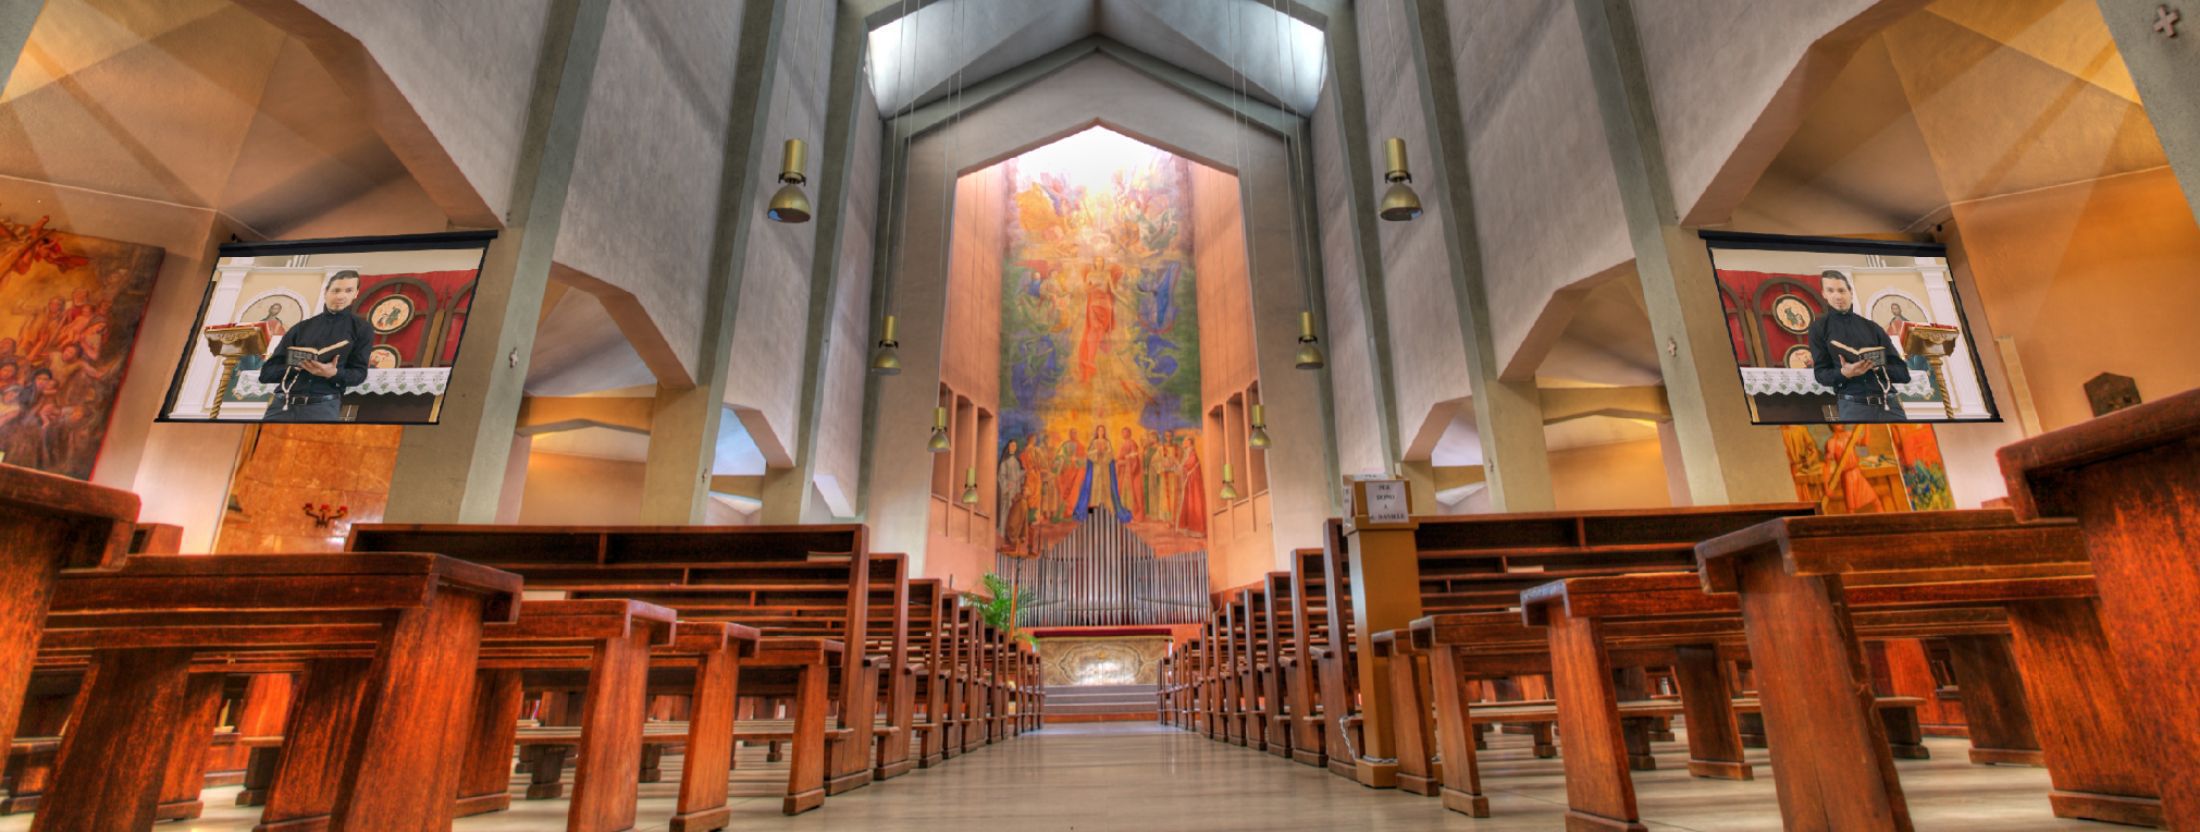 Enhancing and Amplifying Church Sound System Experience Through User-Friendly Technology.